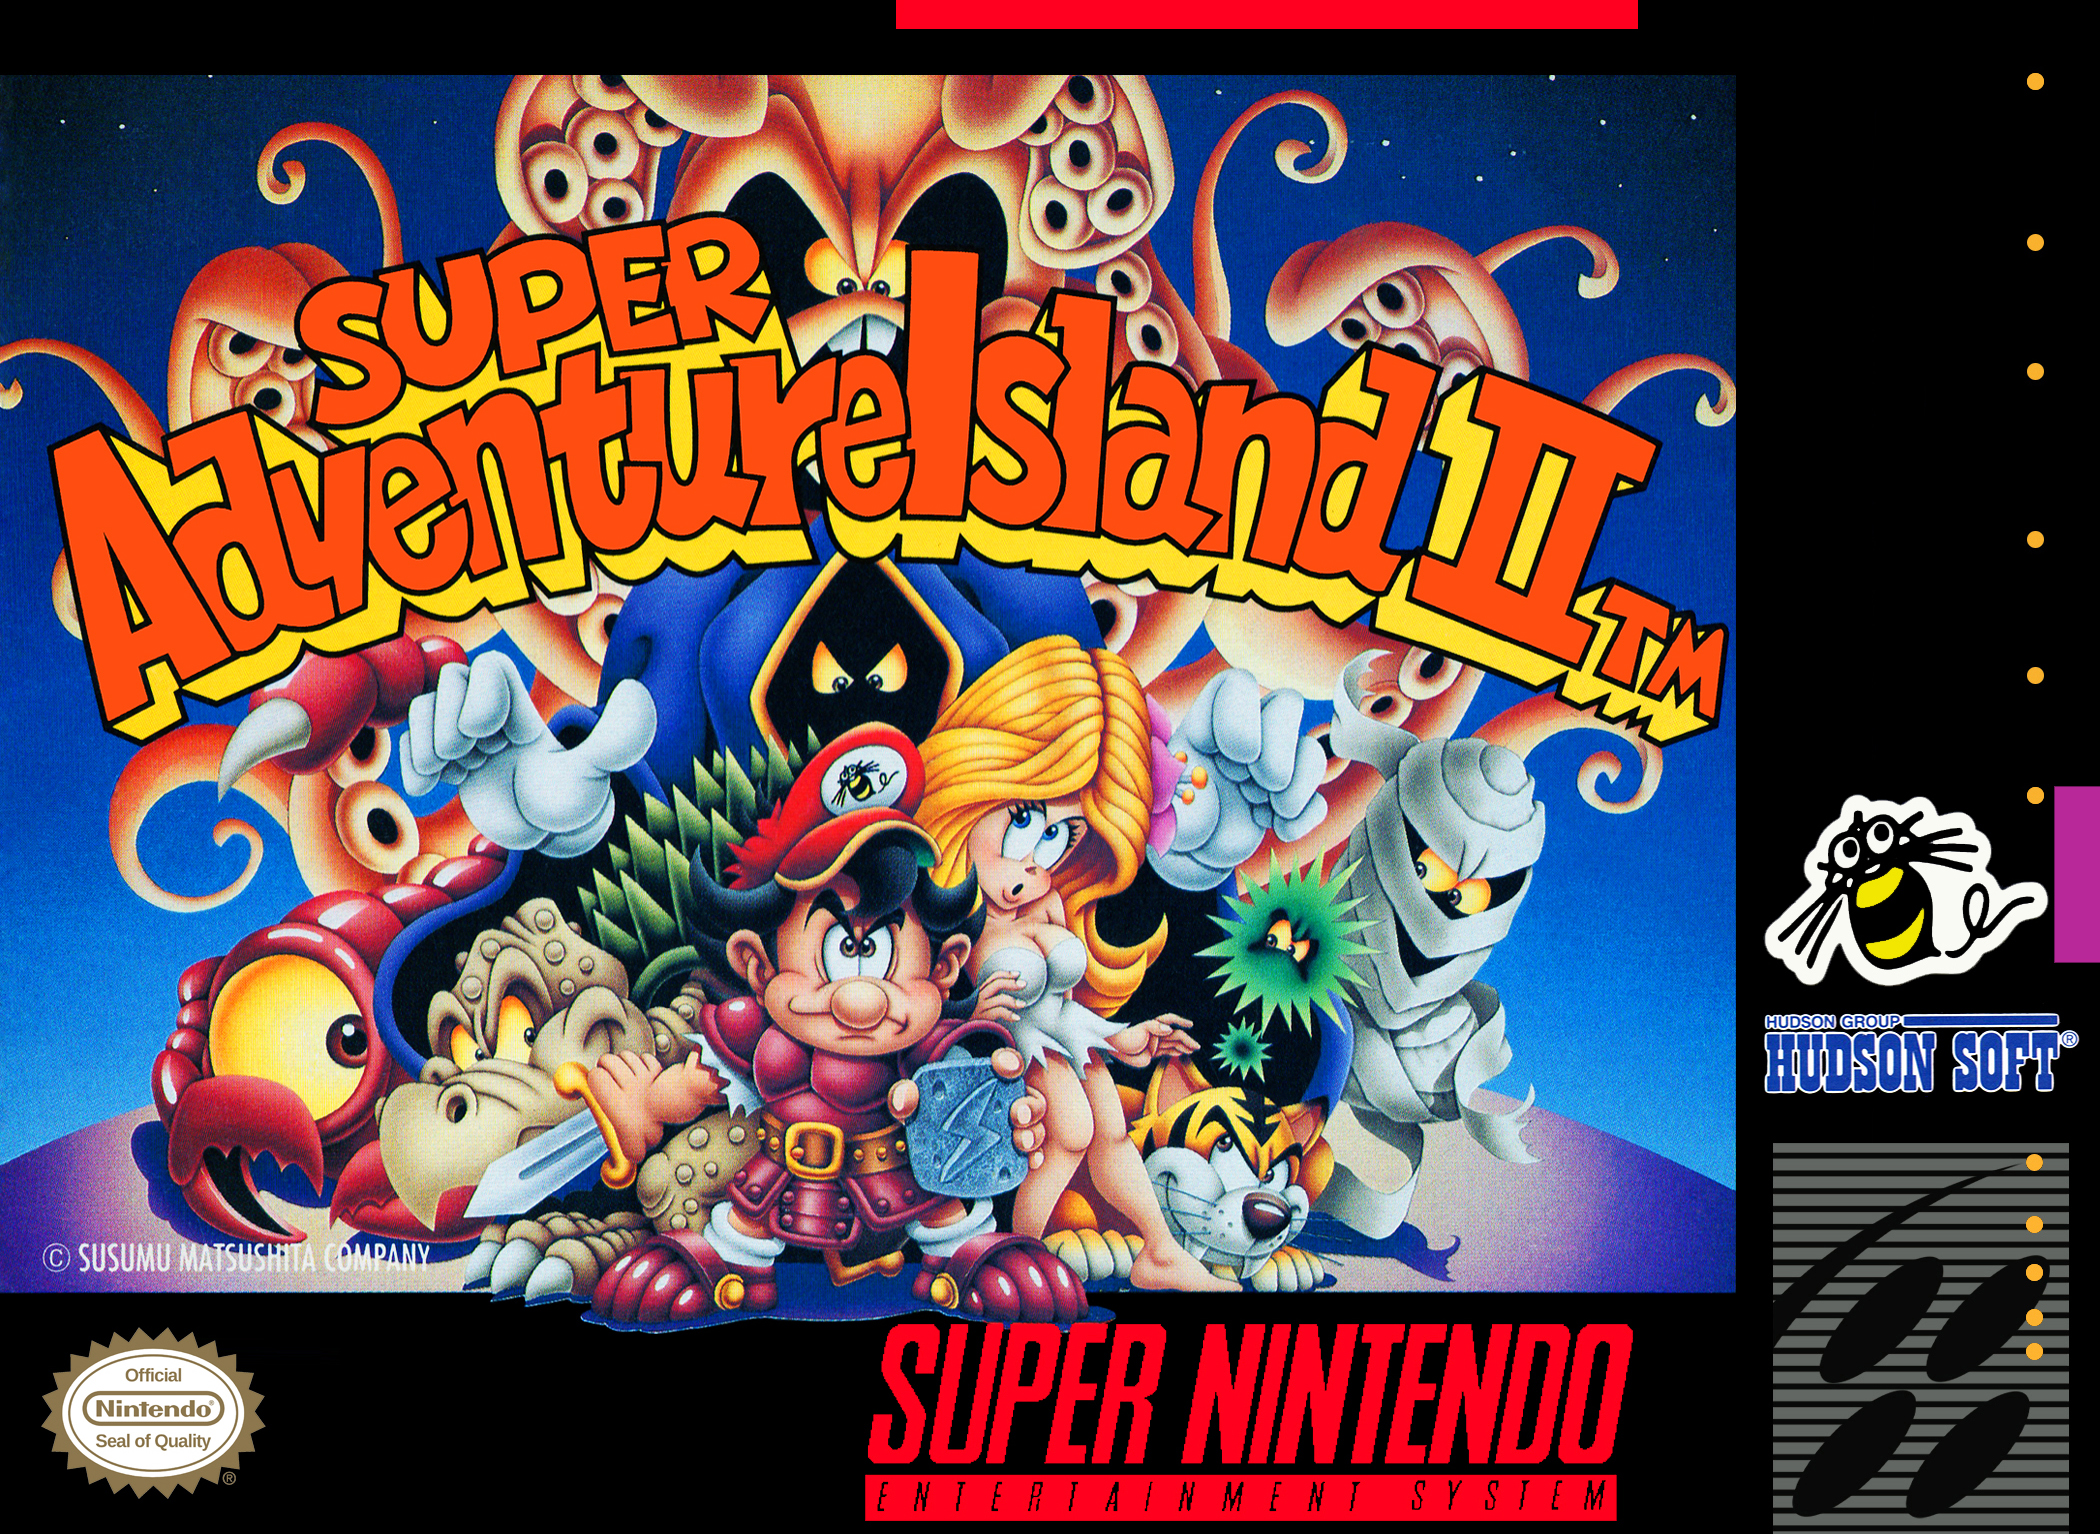 adventure island 2 game free download full version for pc